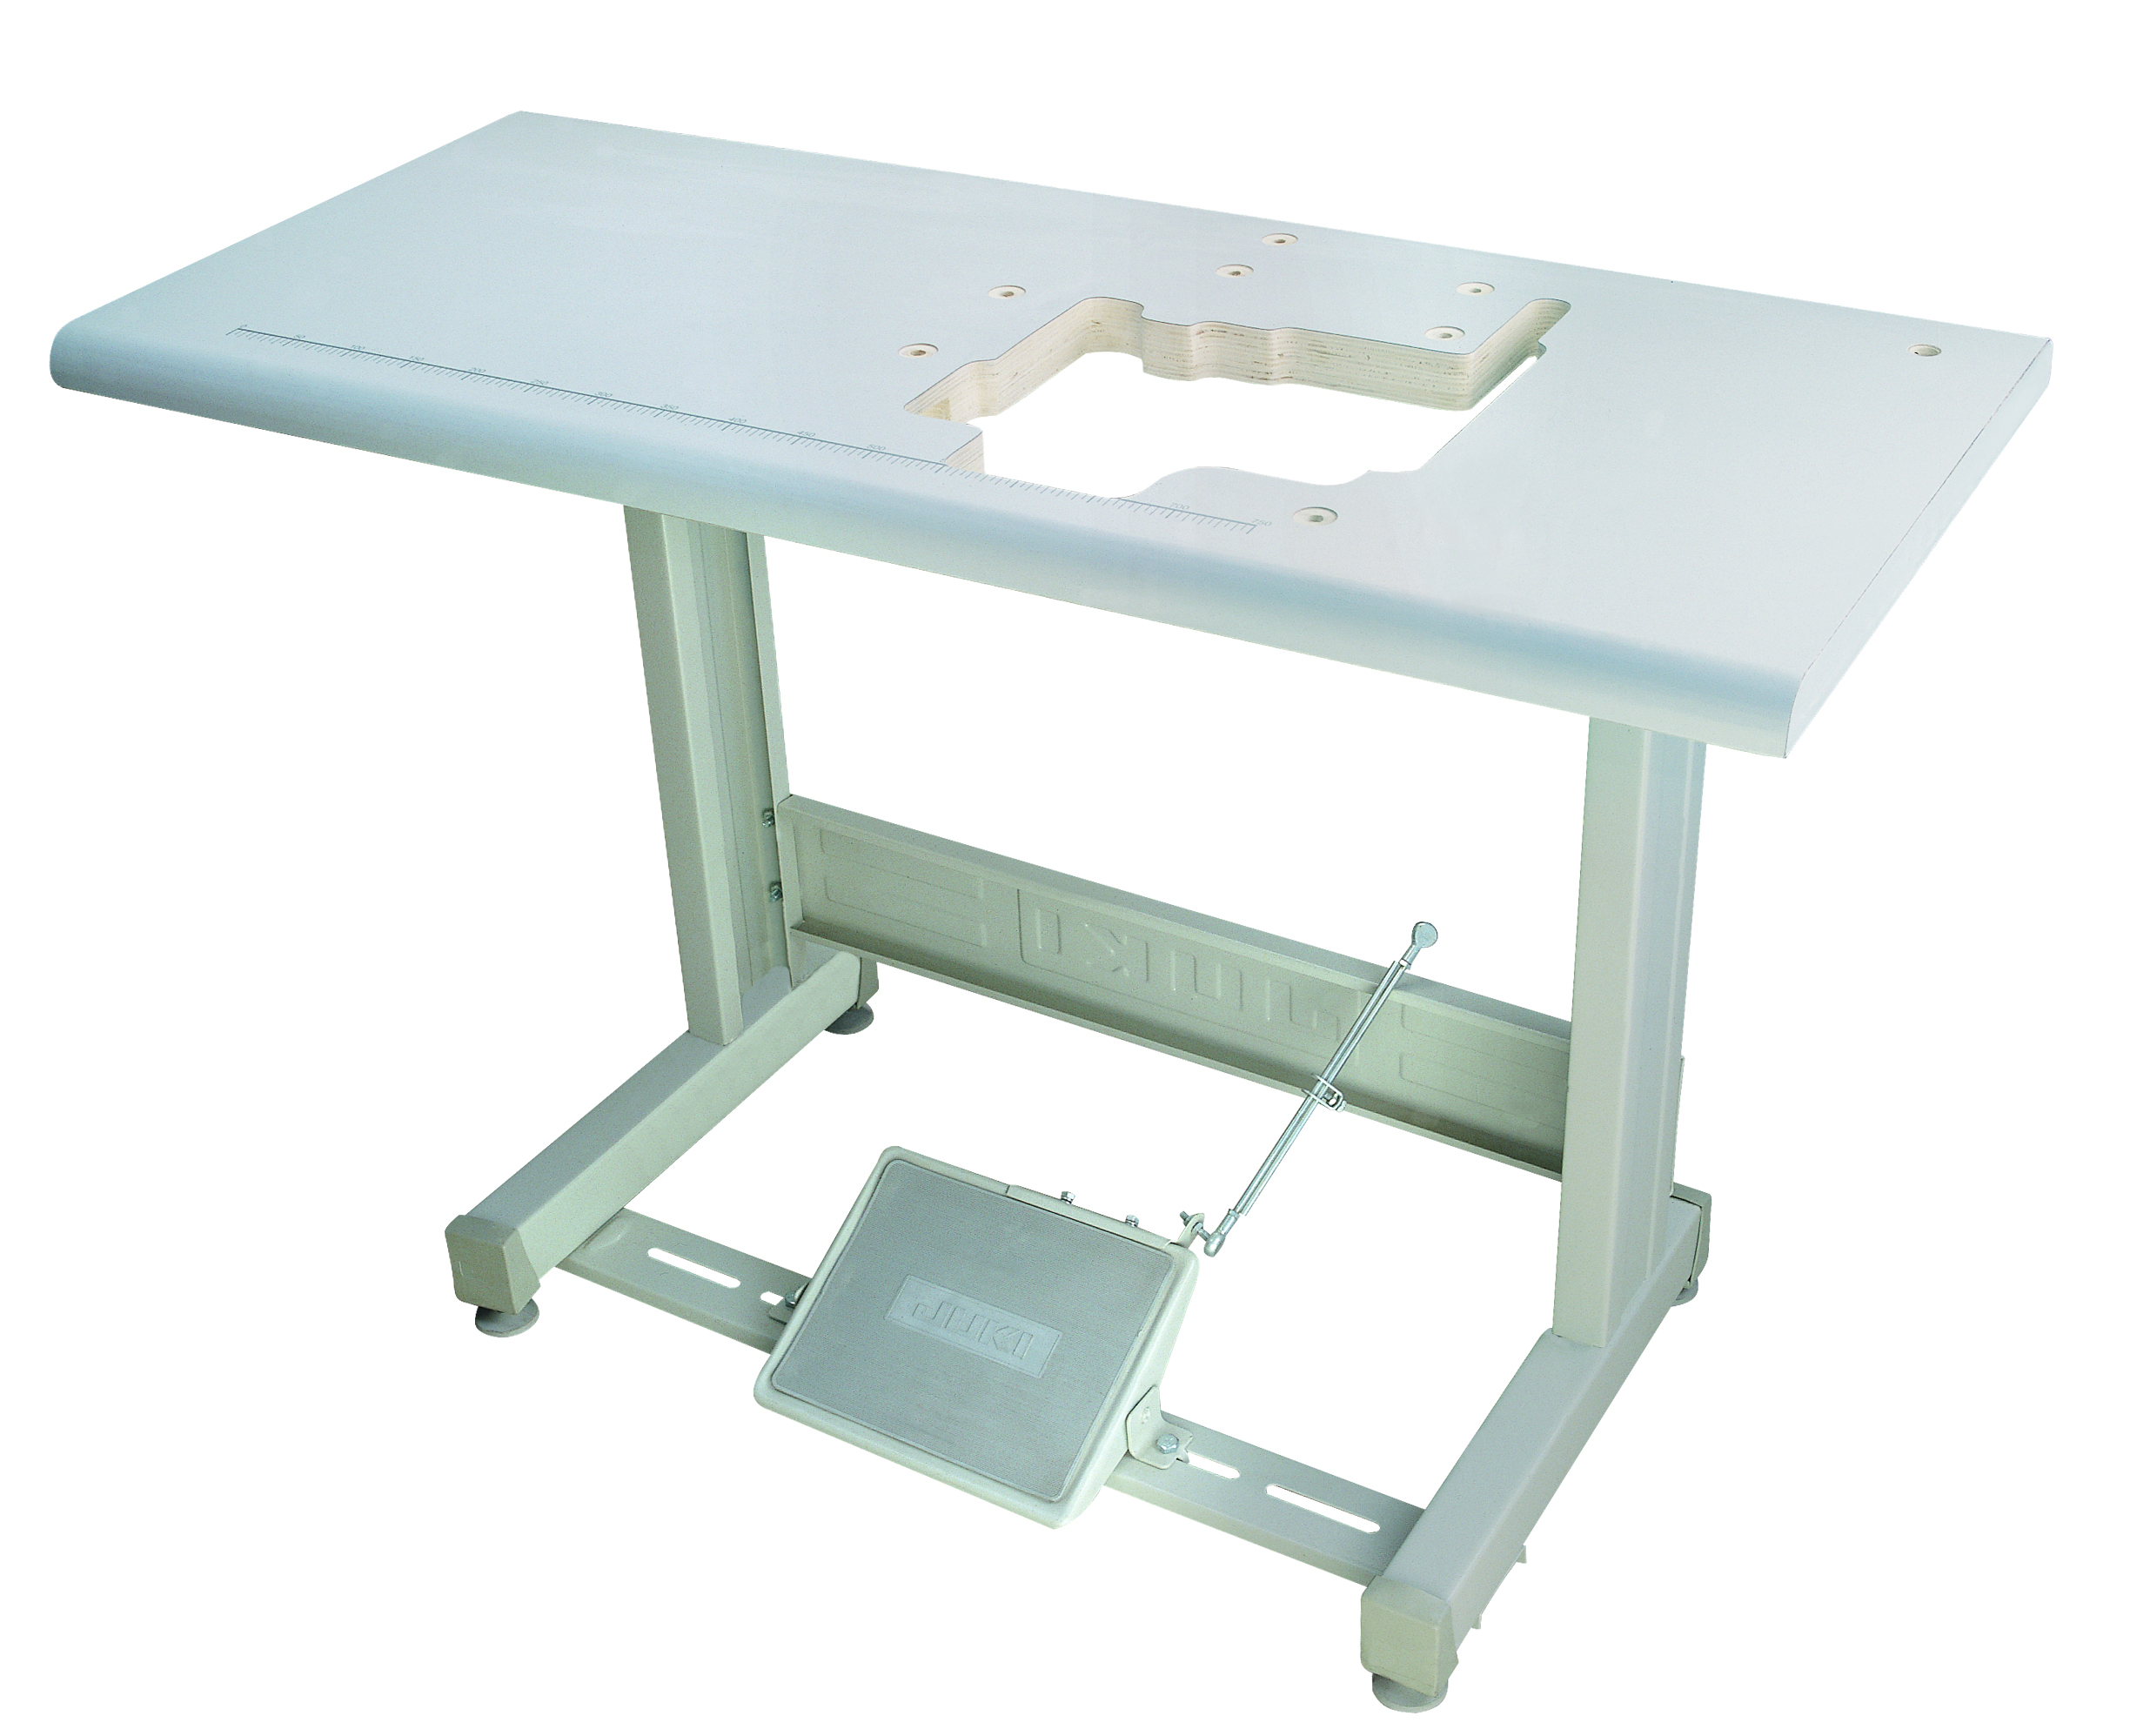 Custom-made working stand and tables for sewing machine